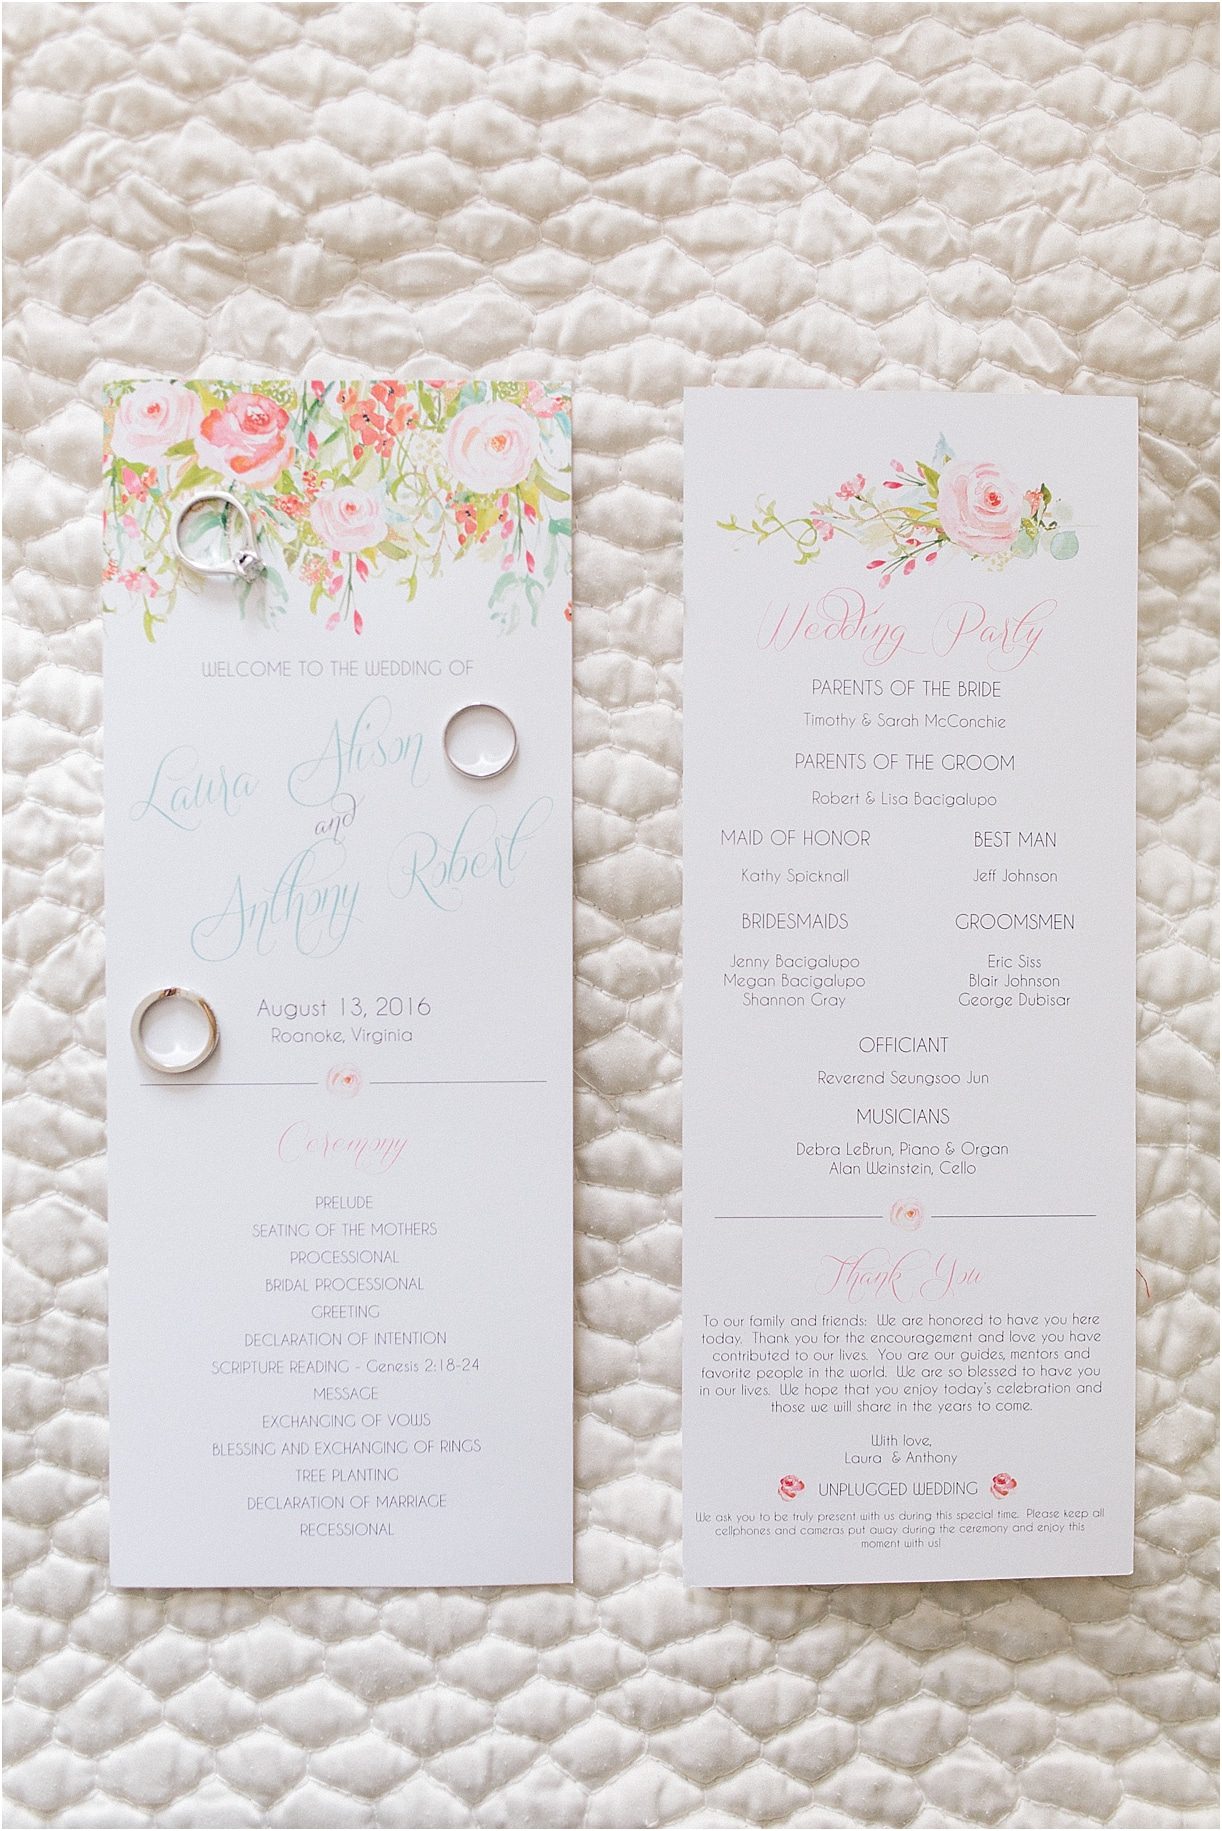 A Pink and Aqua Roanoke Virginia Wedding as seen on Hill City Bride Blog and Magazine - wedding stationery